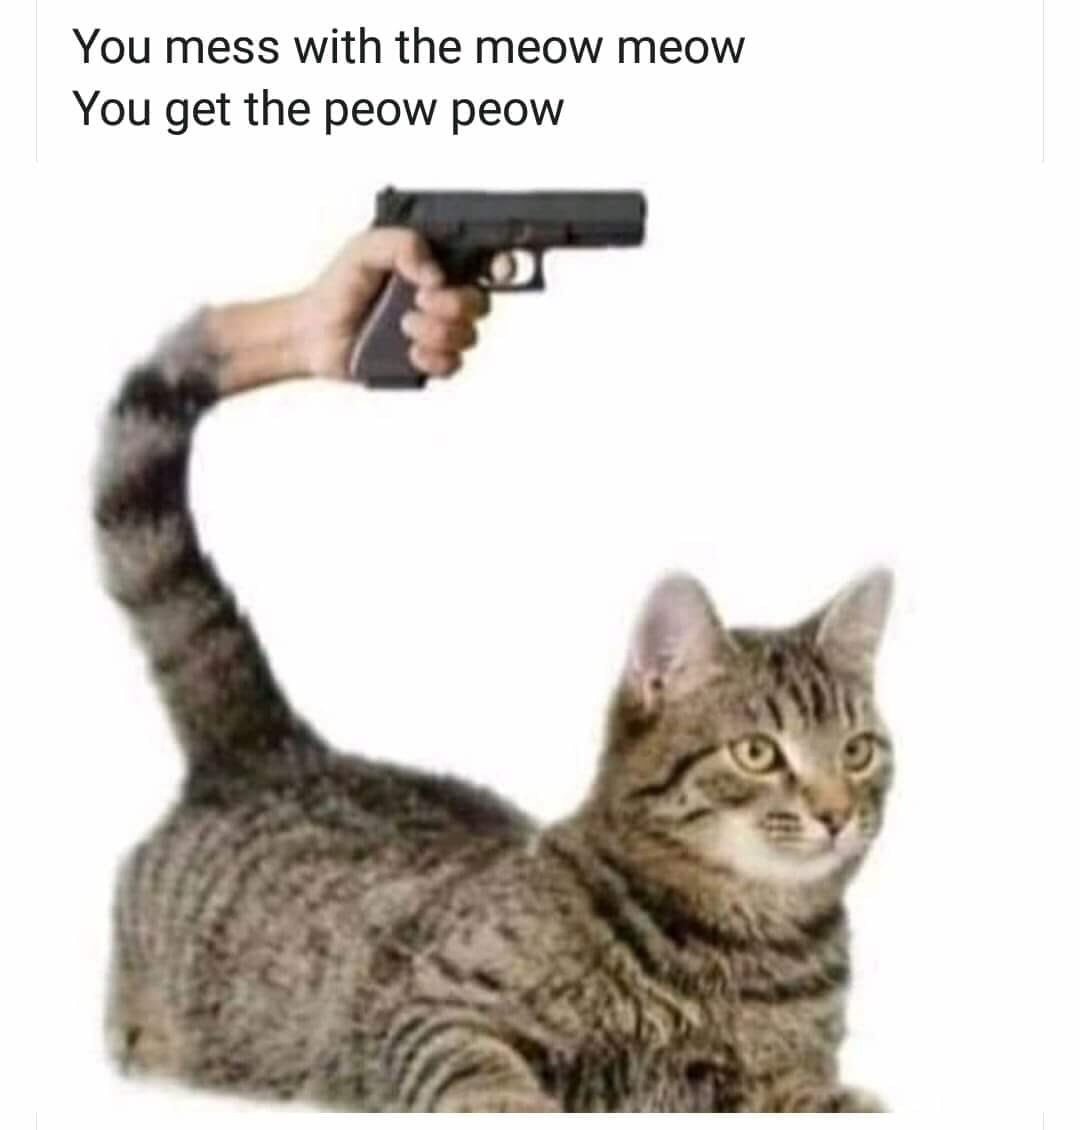 dank meme about you mess with the meow meow - You mess with the meow meow You get the peow peow